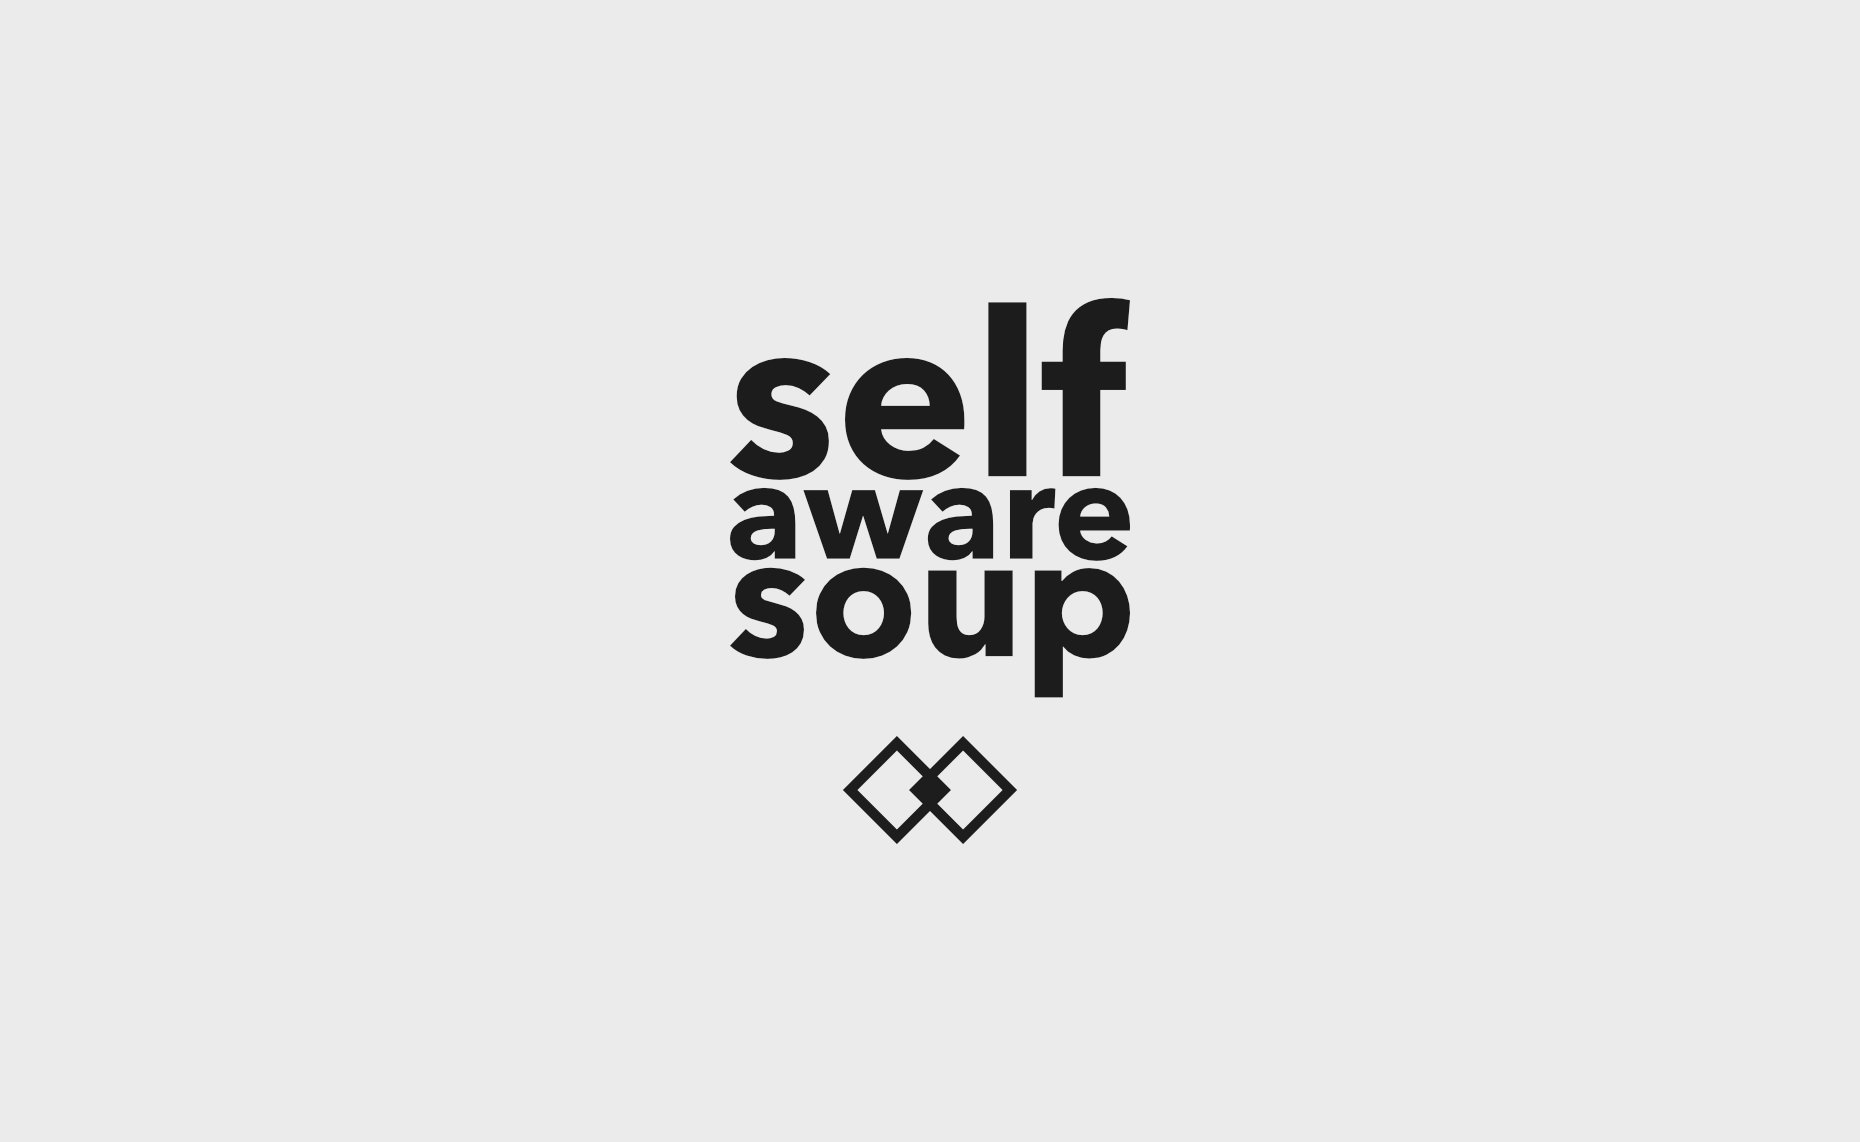 Text logo: "self aware soup", arranged in a square, below a figure of two slightly overlapping squares next to each other